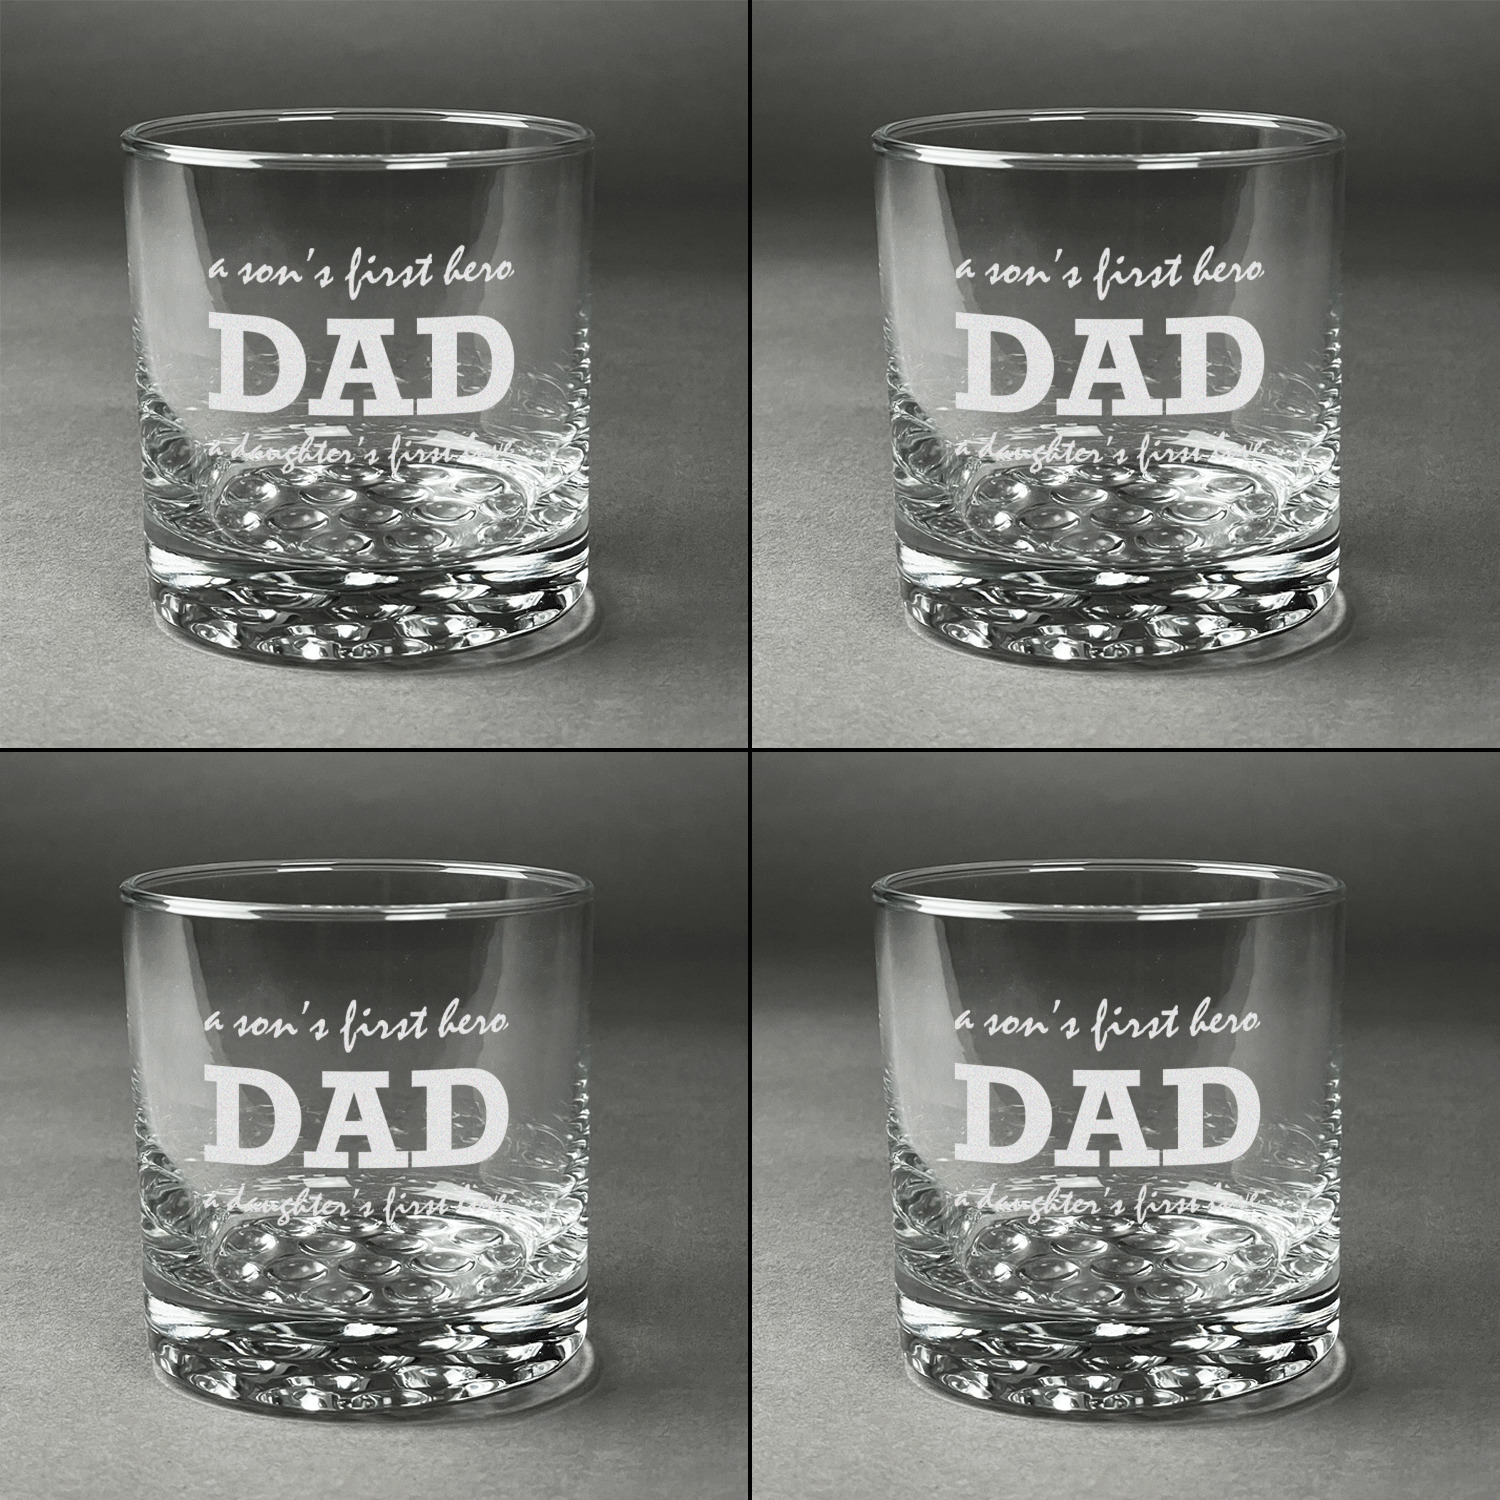 https://www.youcustomizeit.com/common/MAKE/1018898/Father-Day-Quotes-Sayings-Whiskey-Glasses-Set-of-4-all-Engraved.jpg?lm=1666189983